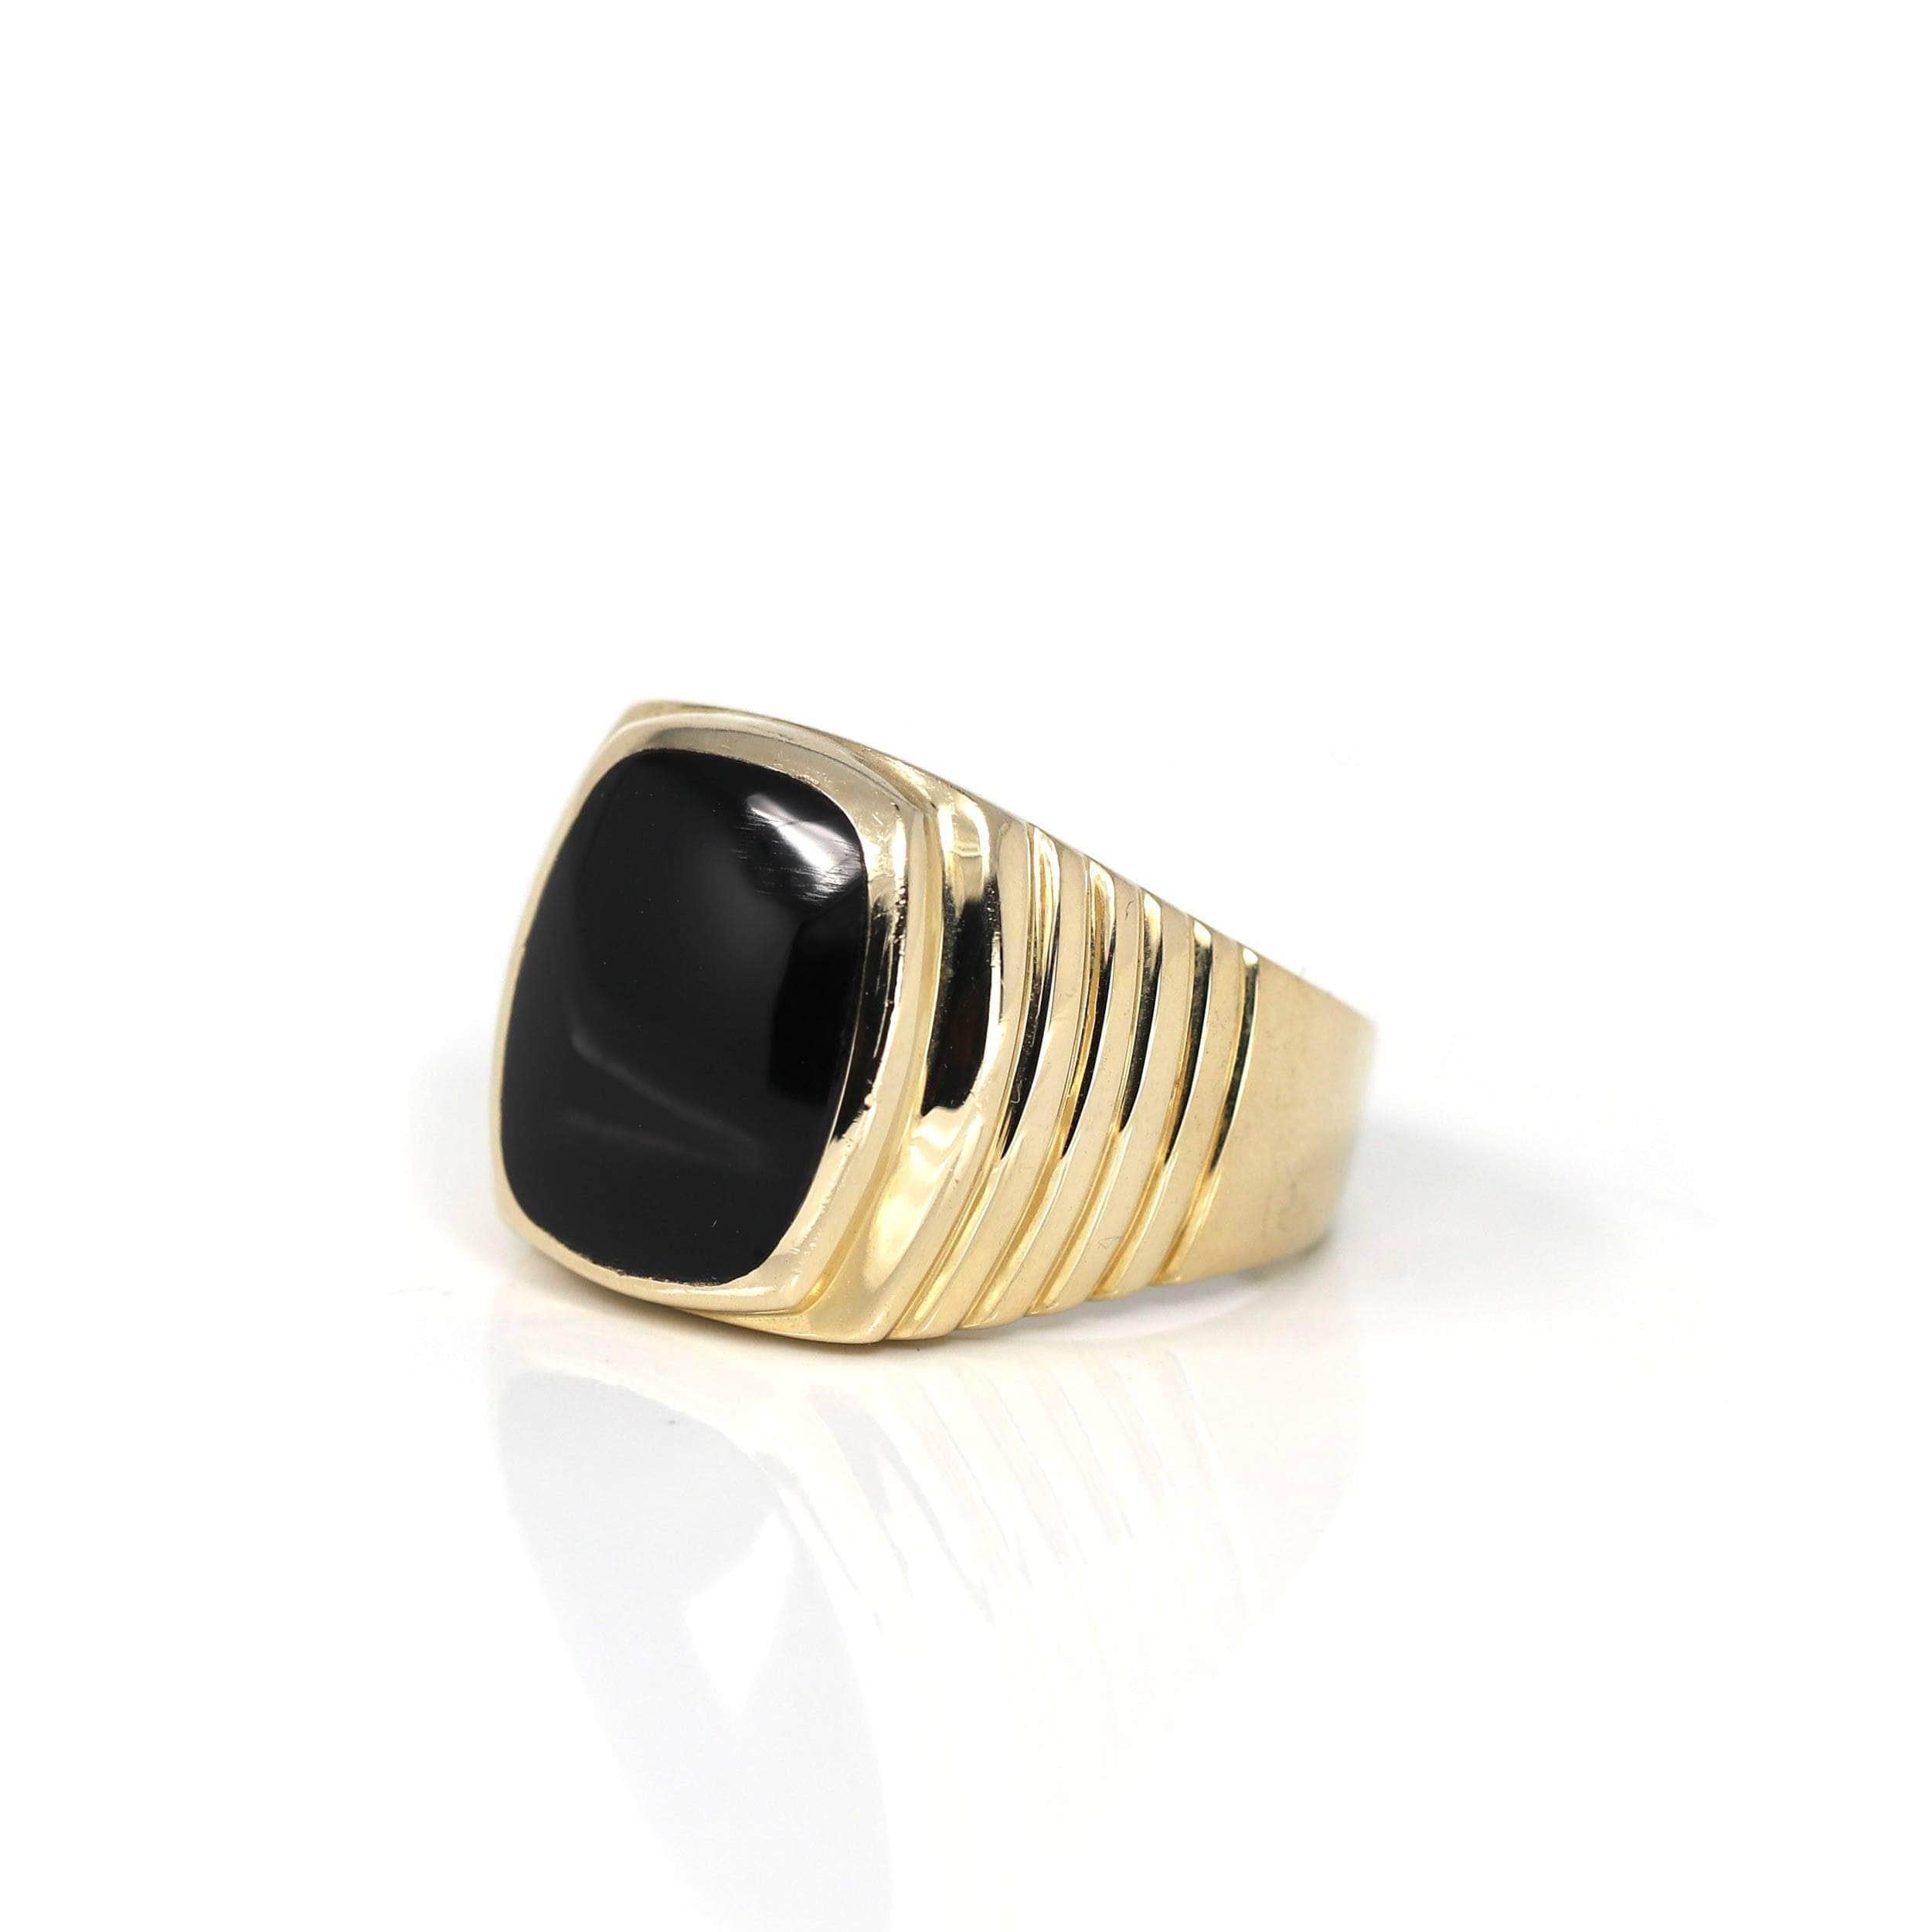 * Design Concept--- This ring features a cabochon genuine AA black onyx. The design is simplistic. The ring looks very exquisite. Baikalla artisans are dedicated to combining beautiful gemstones with luxury. The essence of this faceted black onyx is